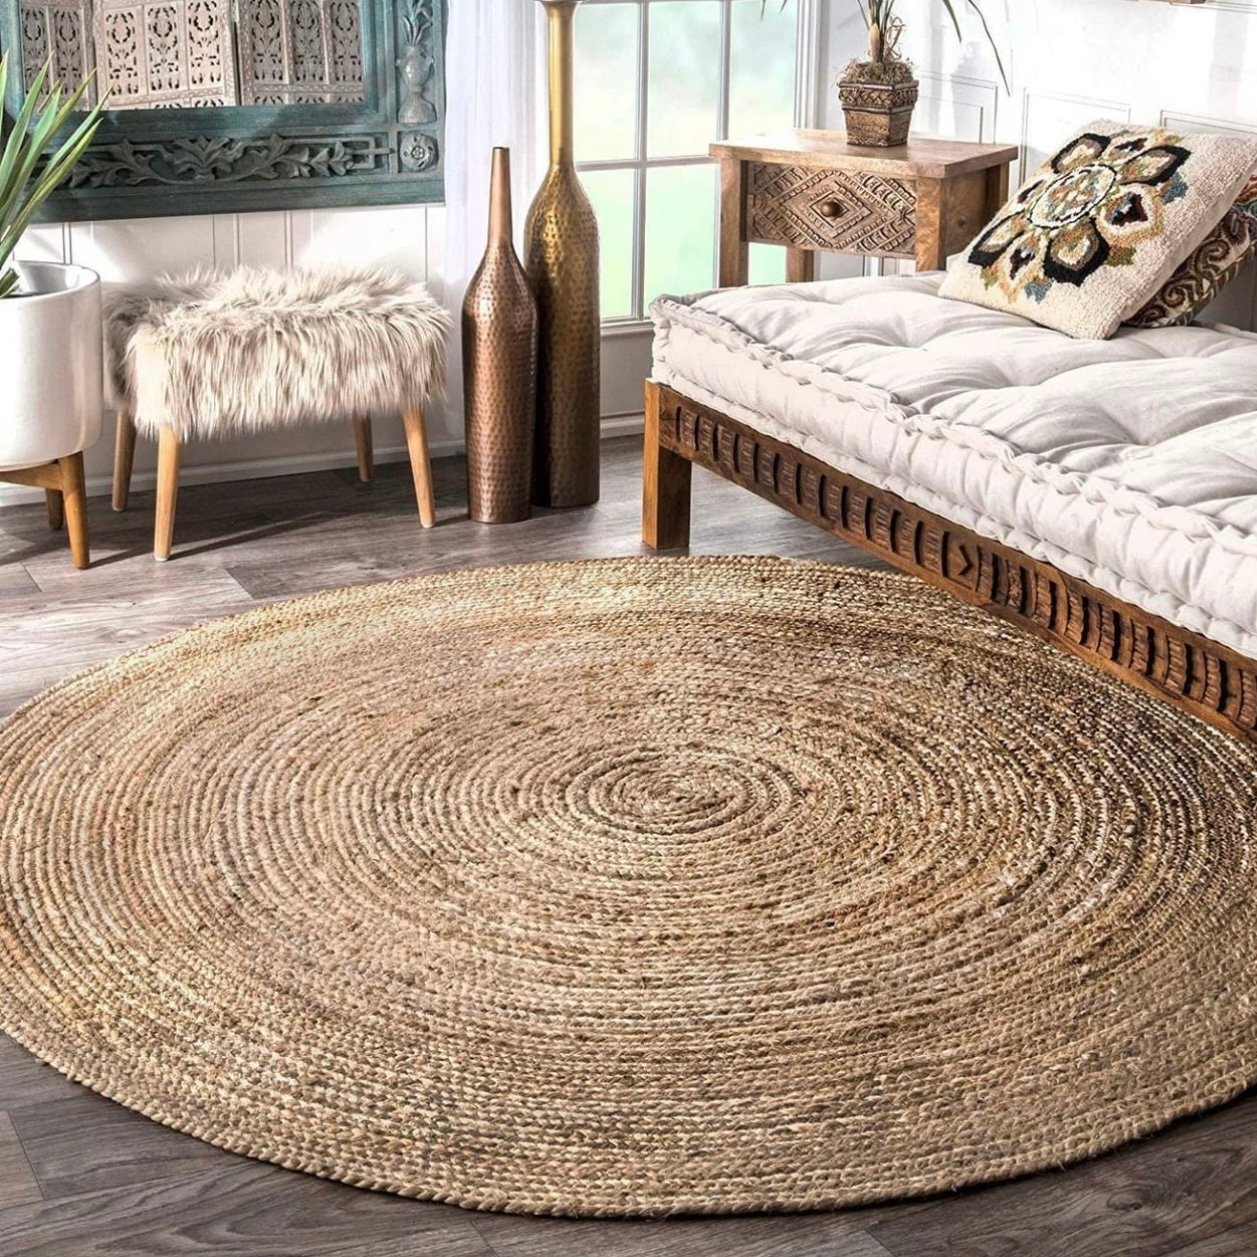 how to clean bamboo rugs